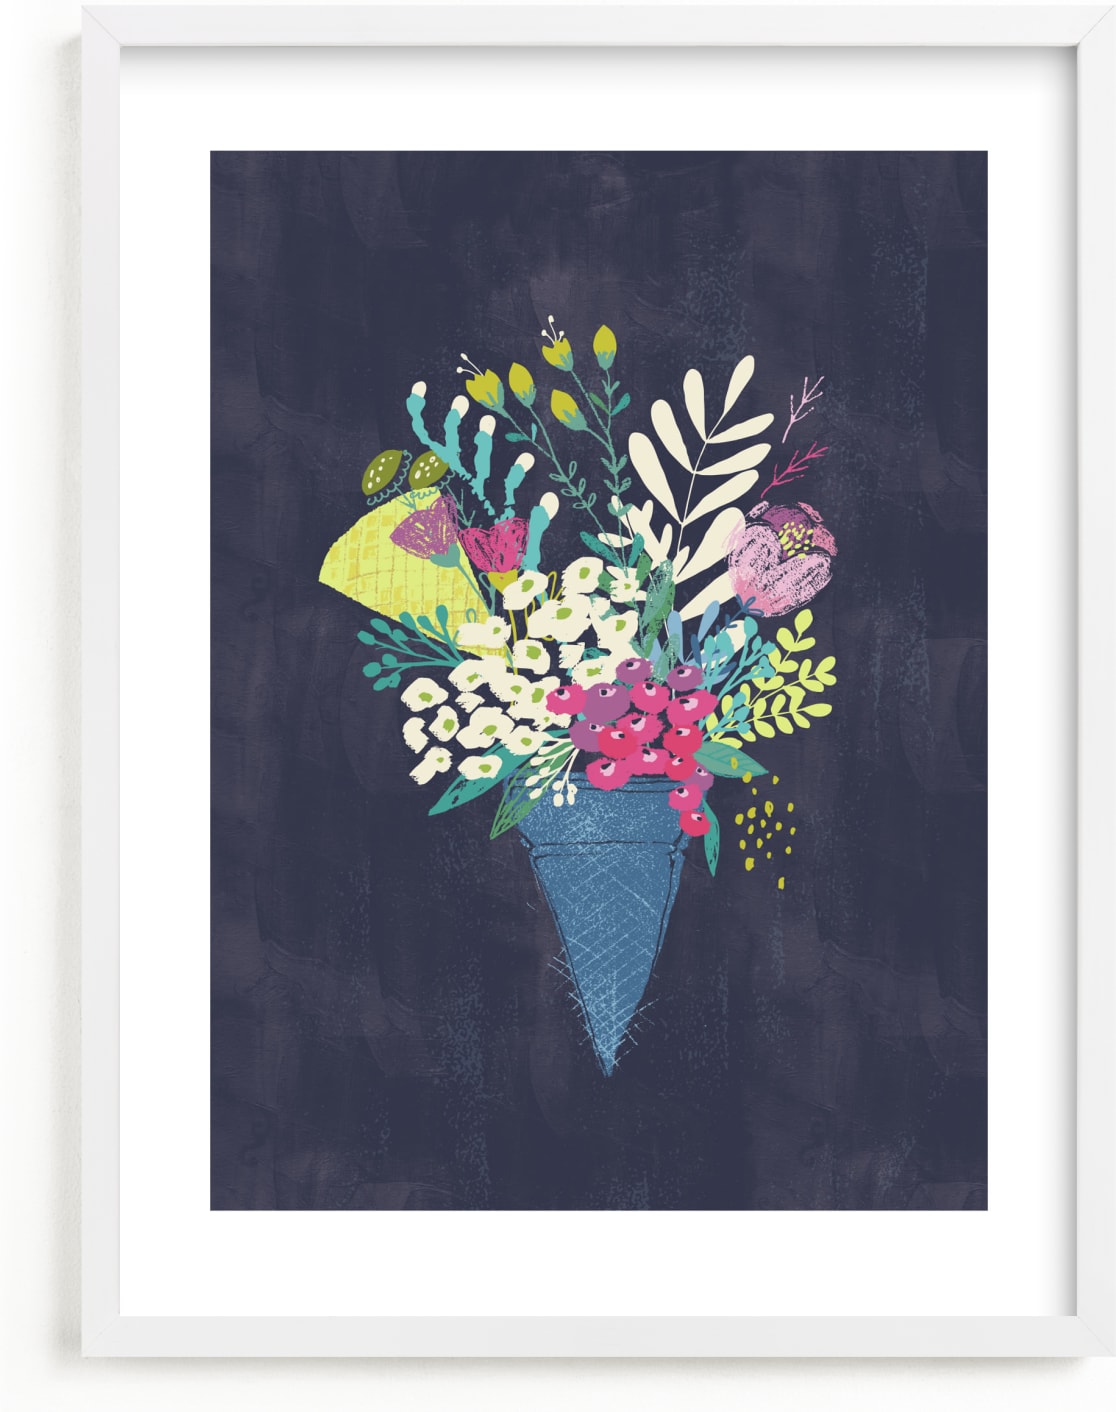 This is a blue kids wall art by Lisa Glanz called Candy blossom.